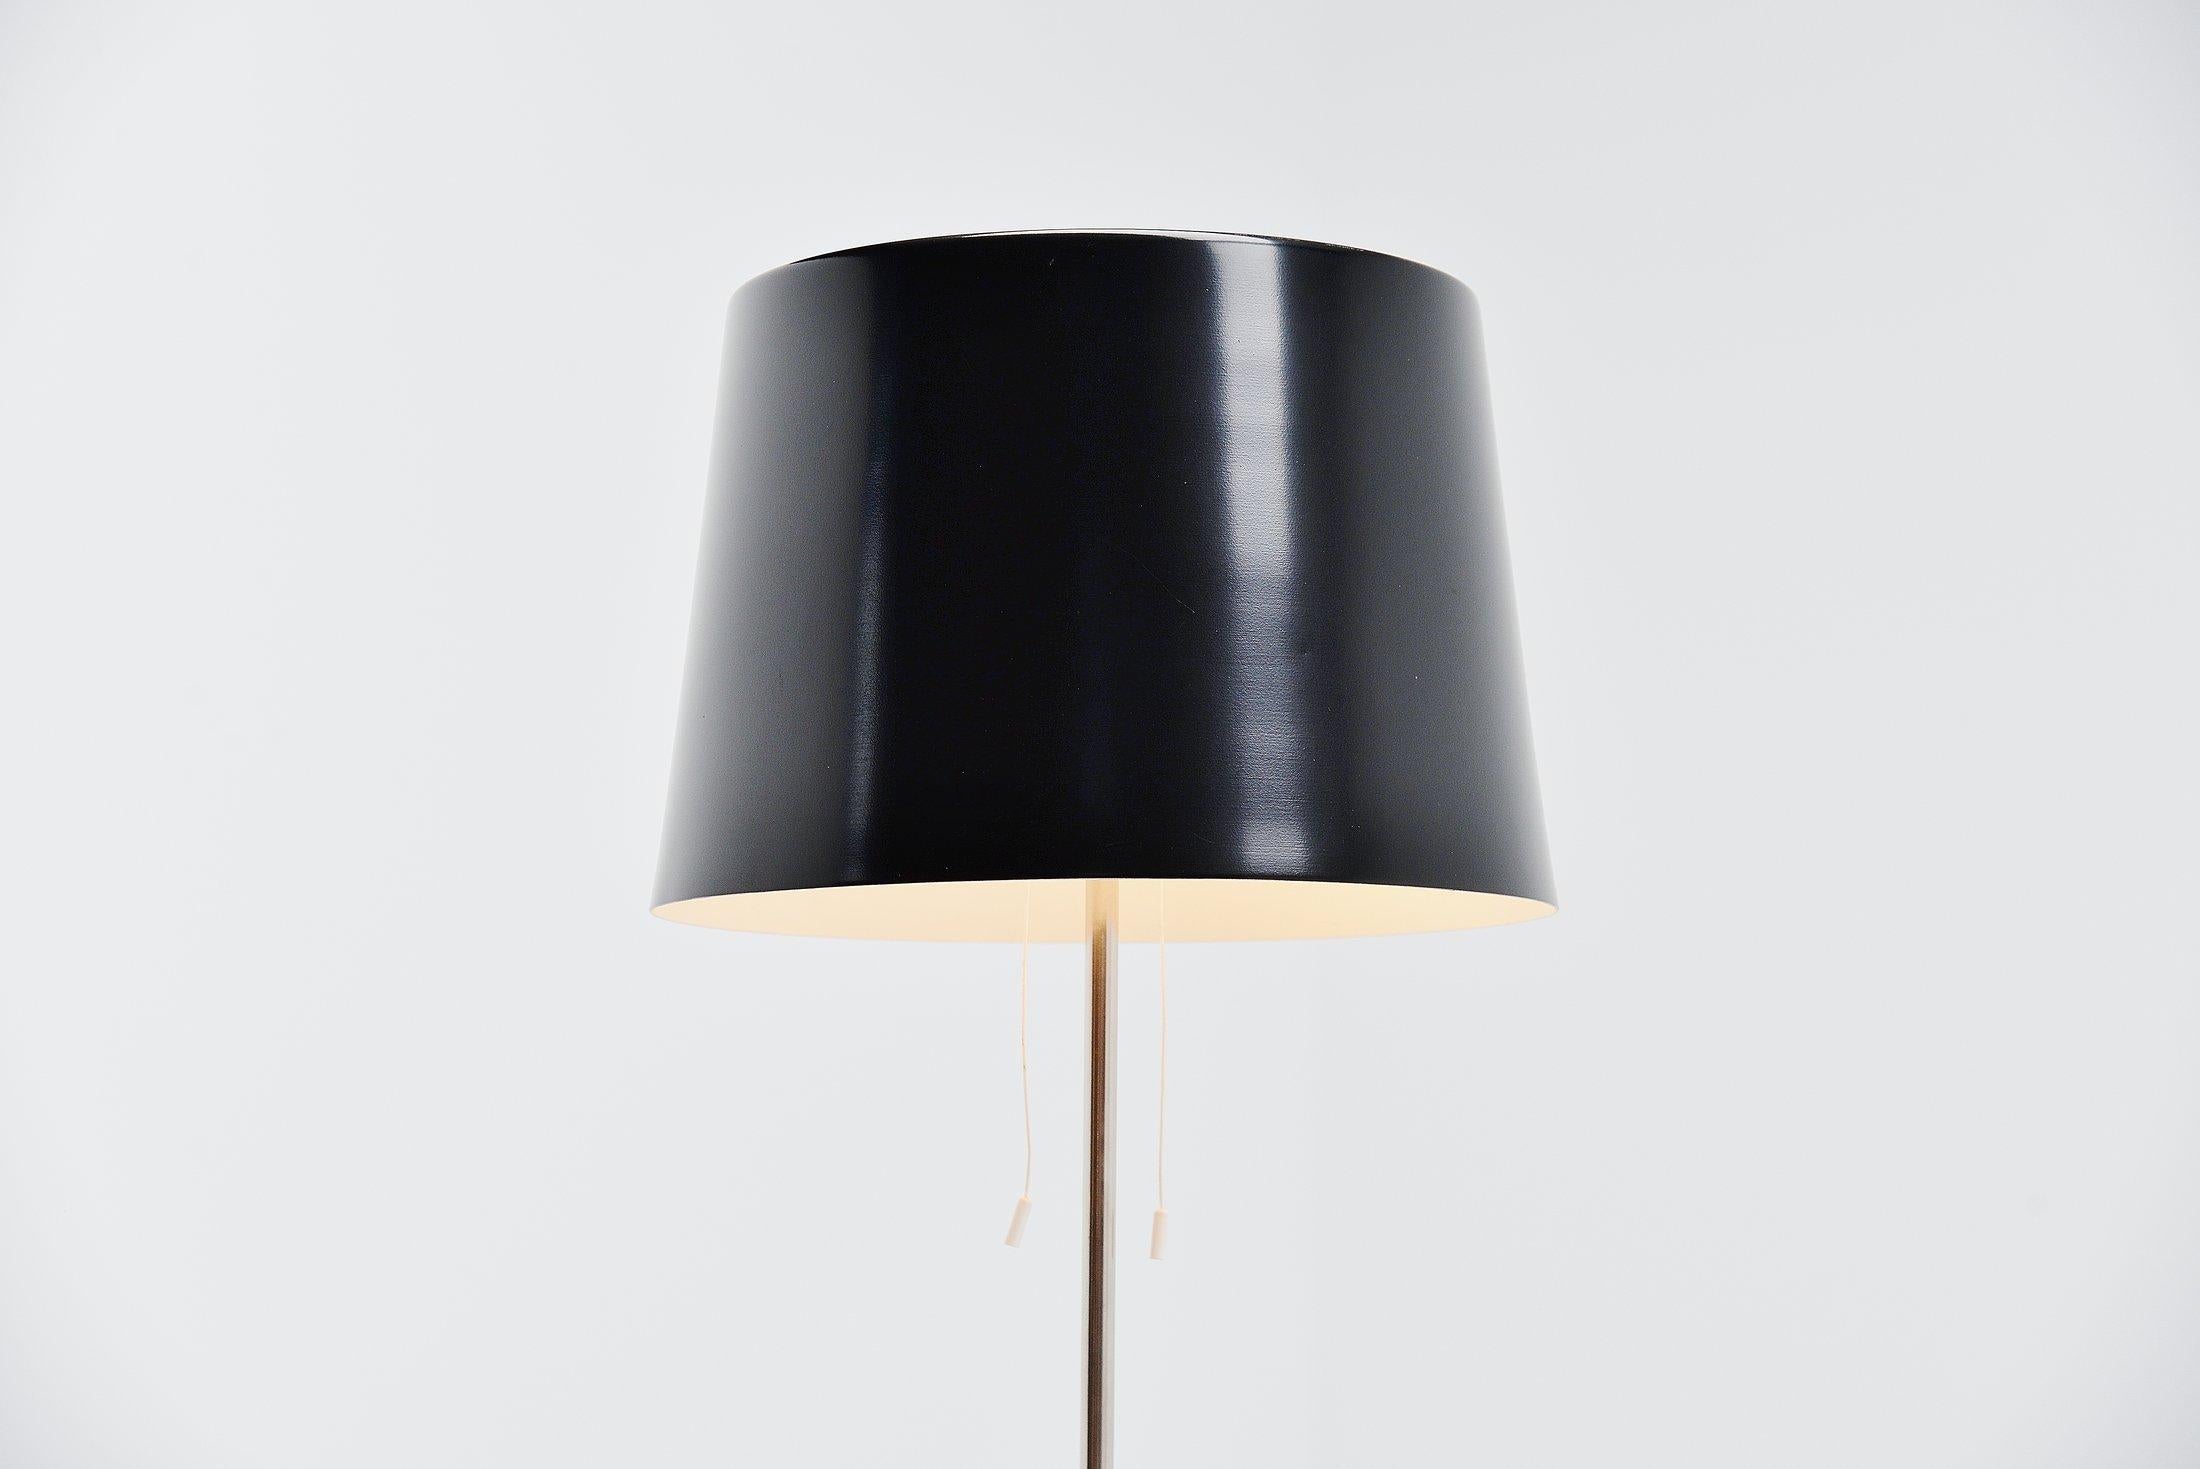 Very nice floor lamp by Gispen. This lamp has an original black lacquered weighted base and a chromed arm. The shade is refinished in original black color and looks amazing. It can be lit separate up and down.

All our lights are checked, cleaned